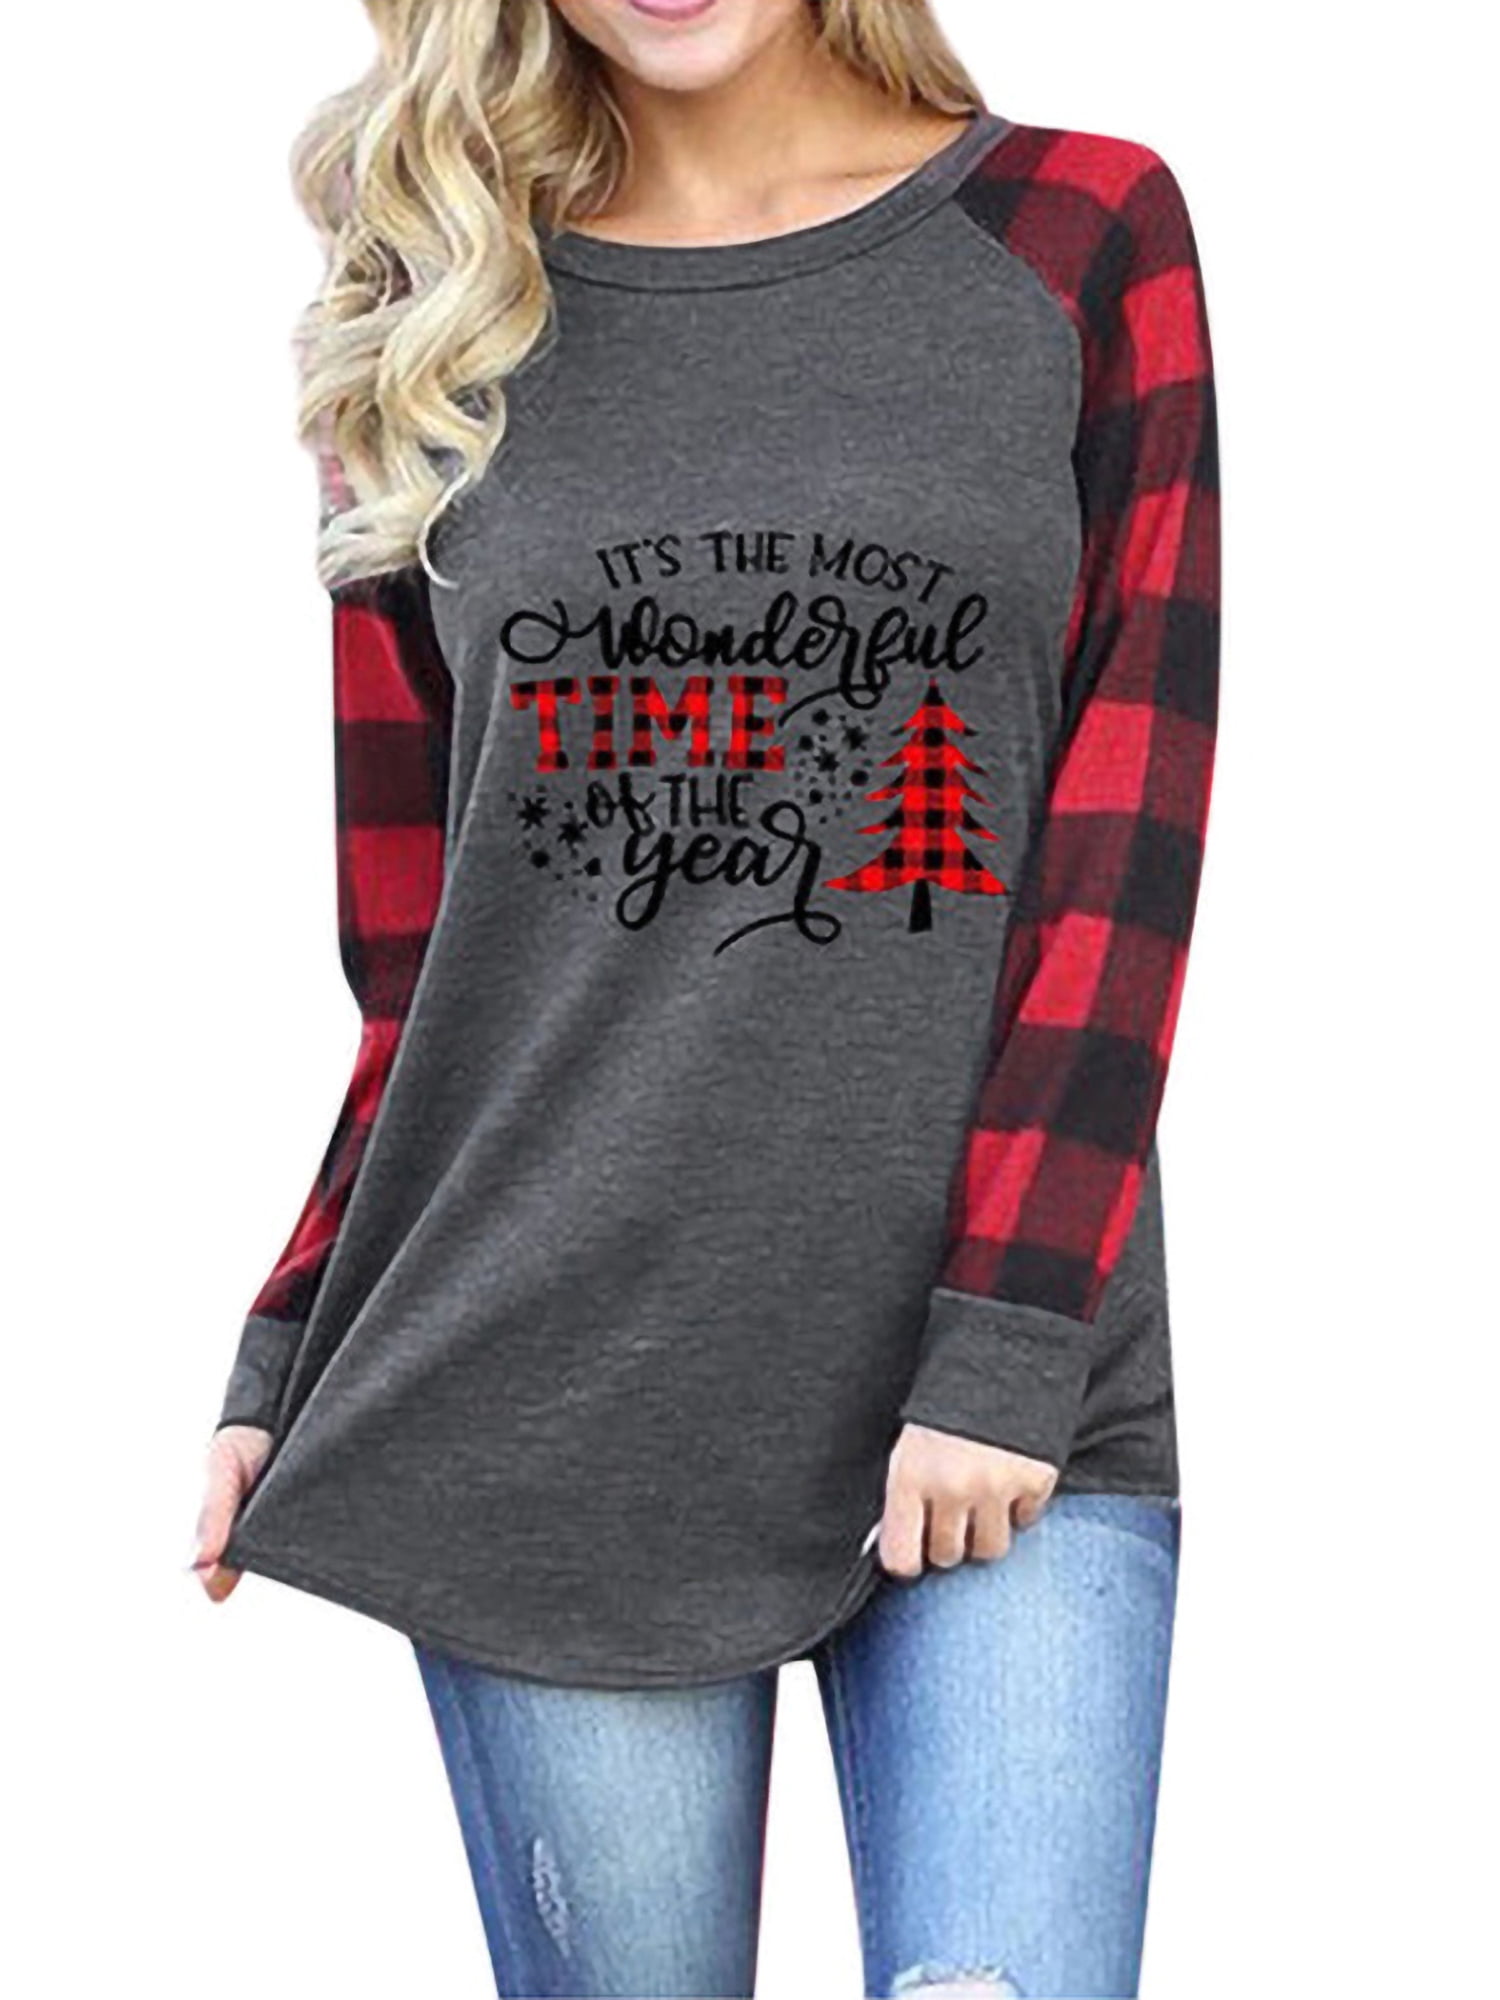 Merry Christmas Graphic T-Shirt Women Letter Printed Long 3//4 Sleeve Splicing Top